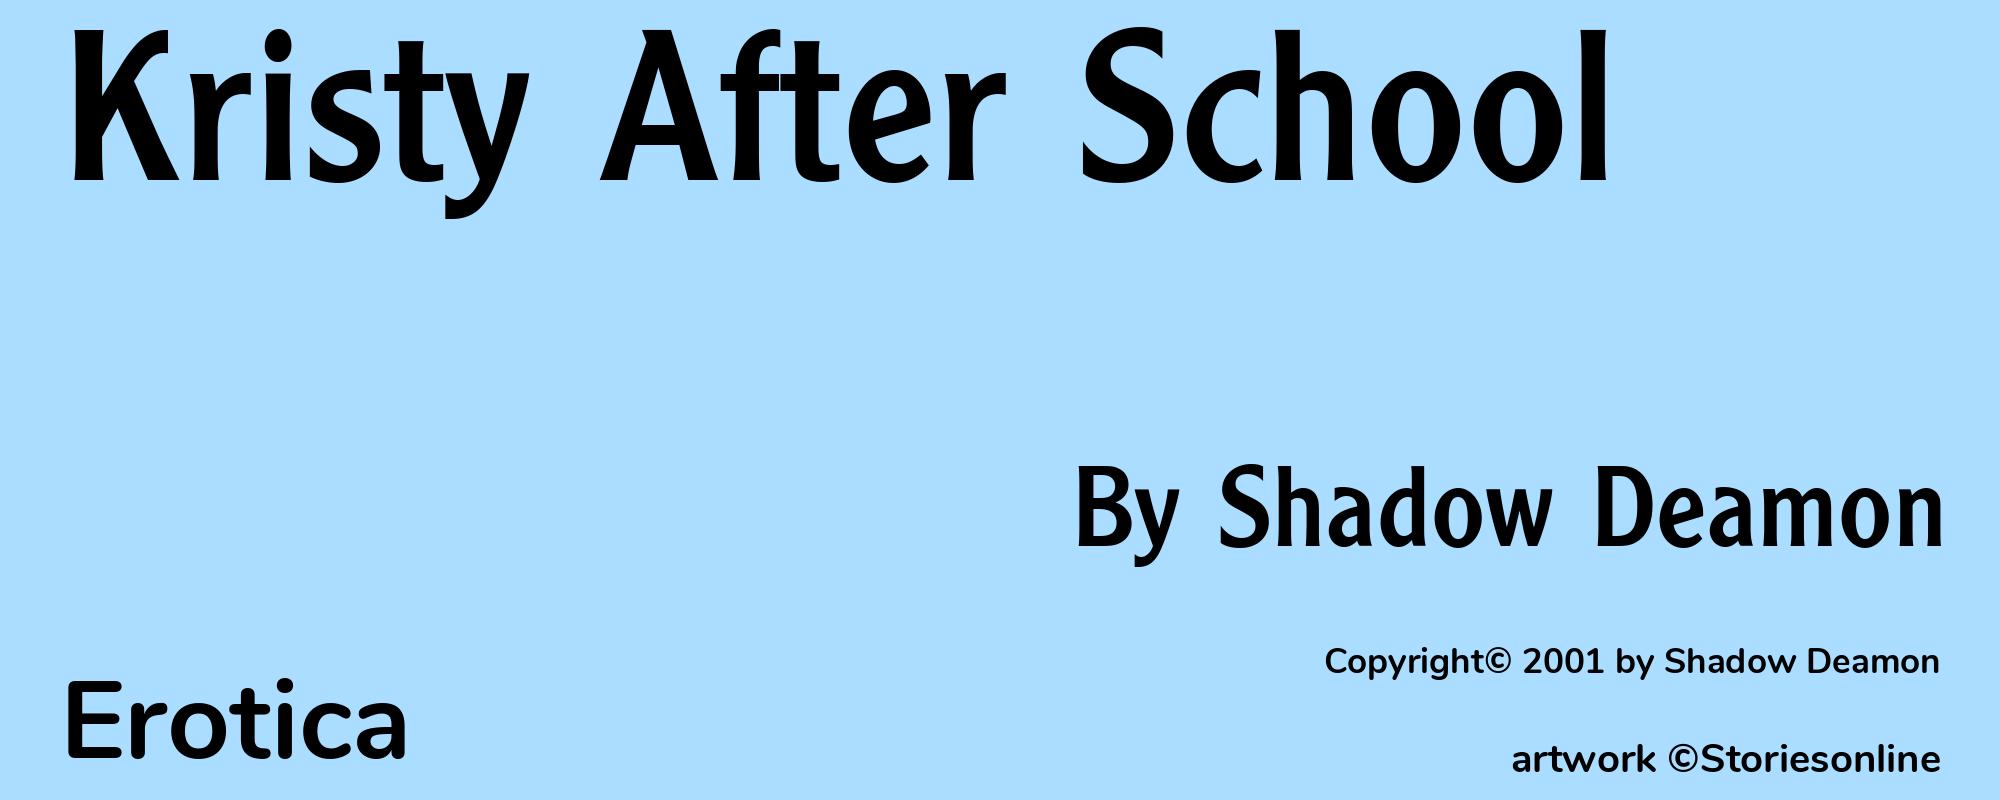 Kristy After School - Cover